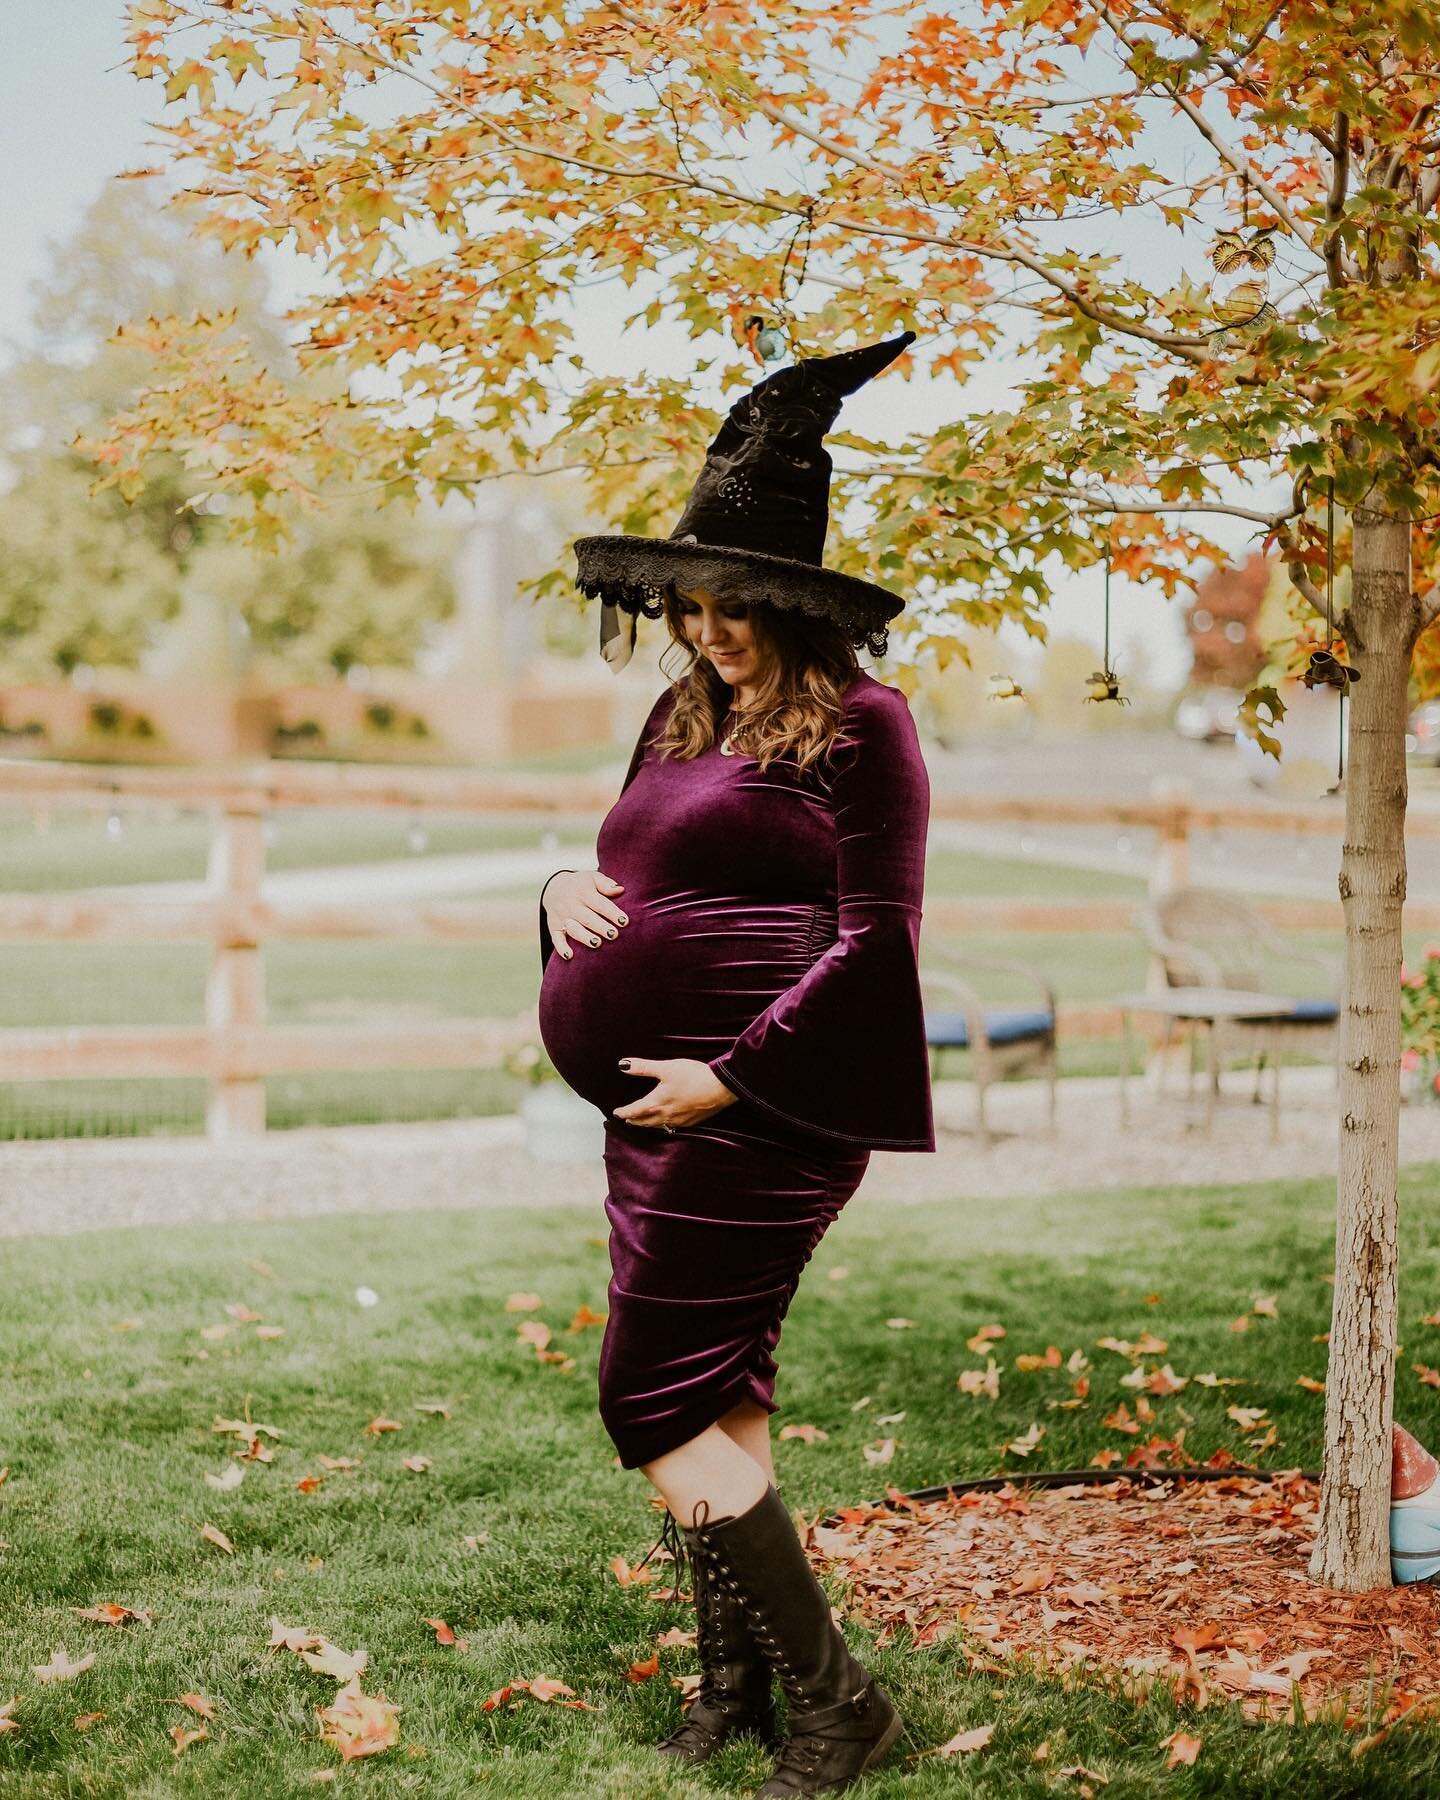 It&rsquo;s officially spooky season 👻 🎃 loved this Halloween themed maternity session! I am a HUGE fan of Halloween and costumes, so if this is something you ever want to incorporate into your session, I&rsquo;m your gal. 
.
.
.
.
.
.
.
.
🏷 
#hall